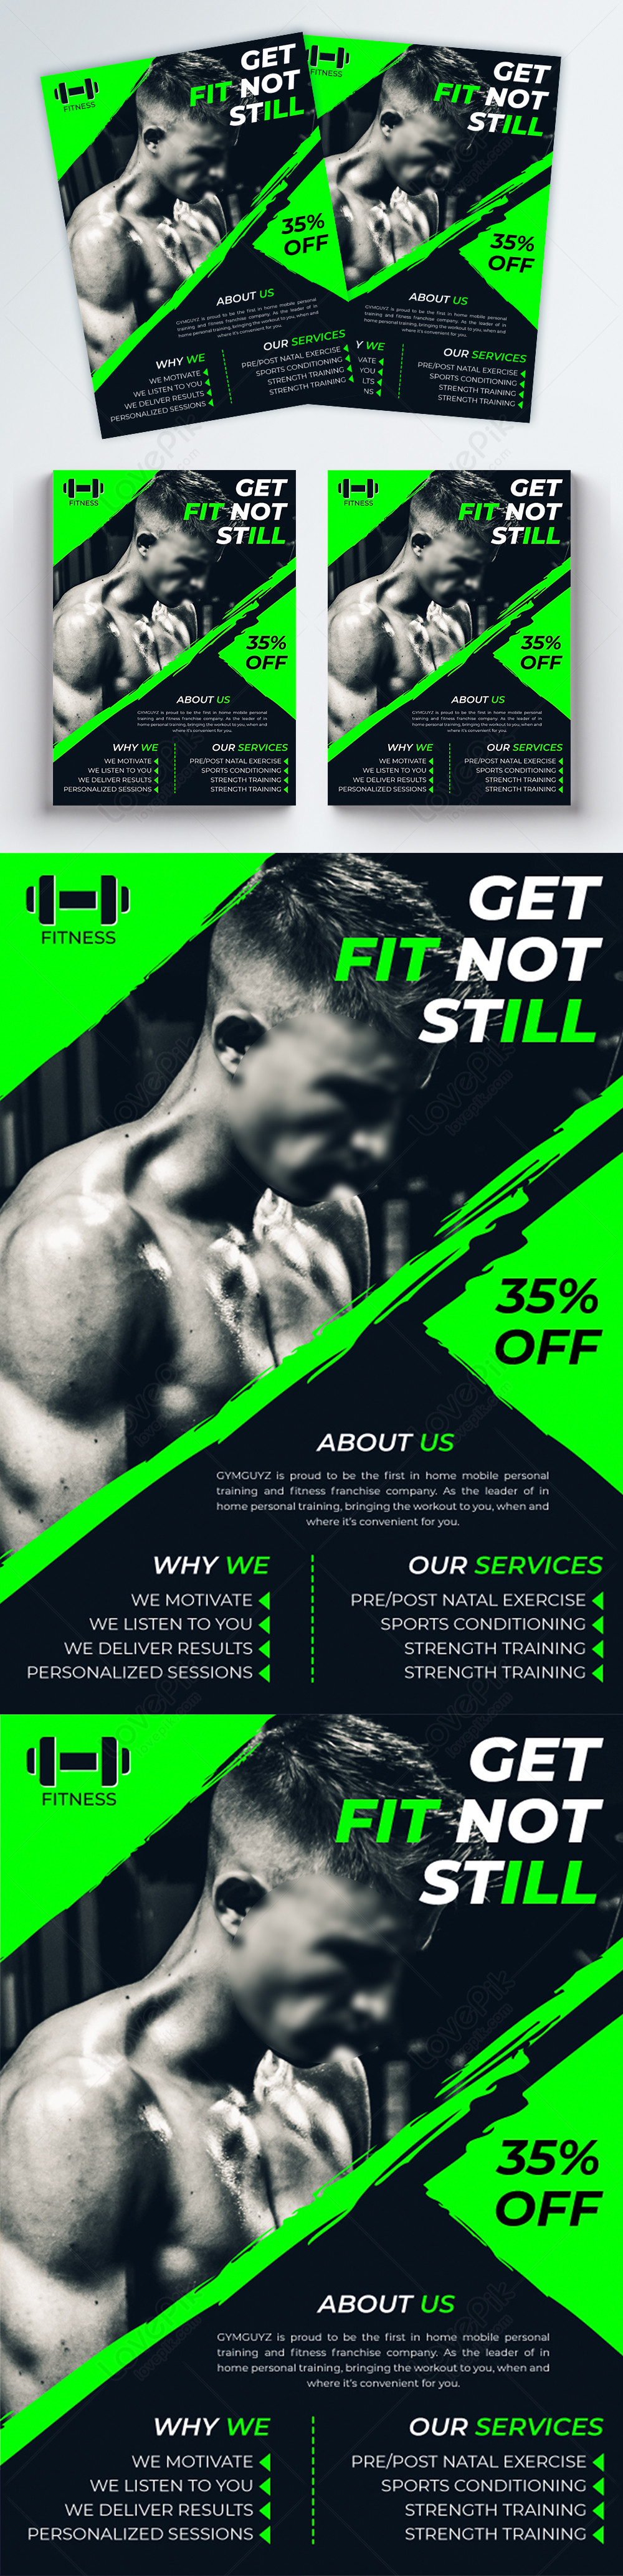 Green Creative Fitness Gym Flyer Template Image Picture Free Download Lovepik Com